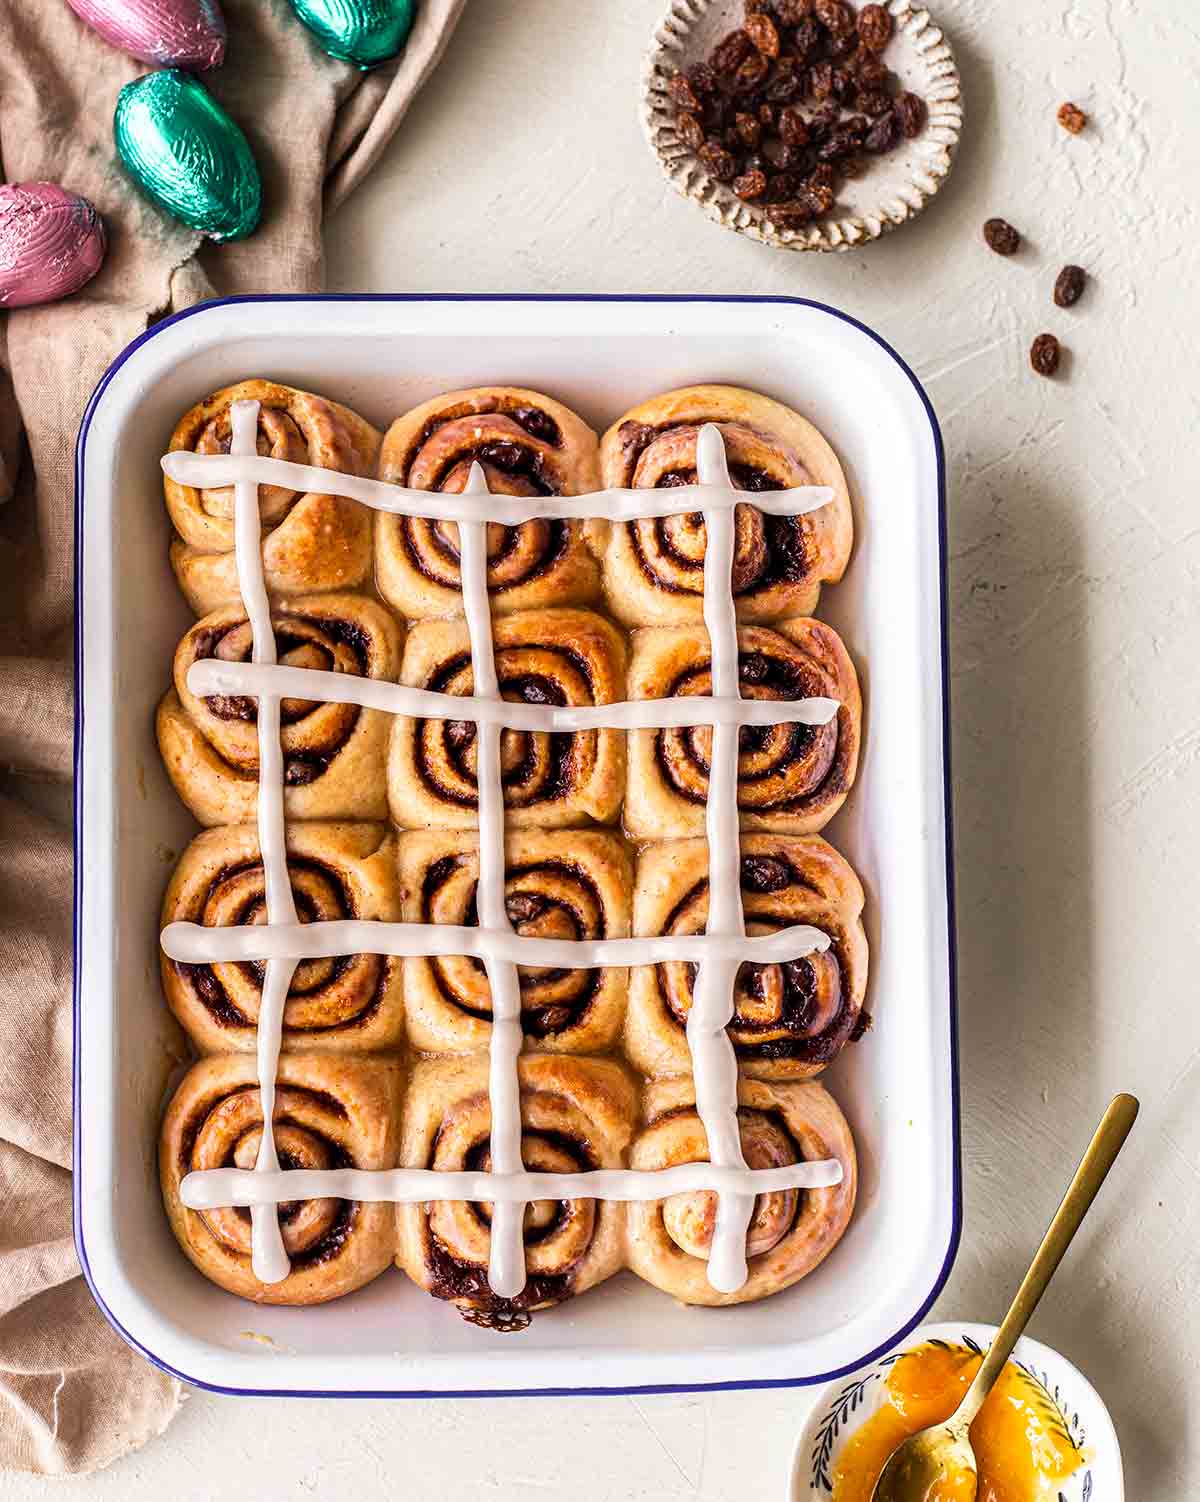 Overhead photo of hot cross cinnamon rolls in baking tray. The cross is extended from one roll to another.